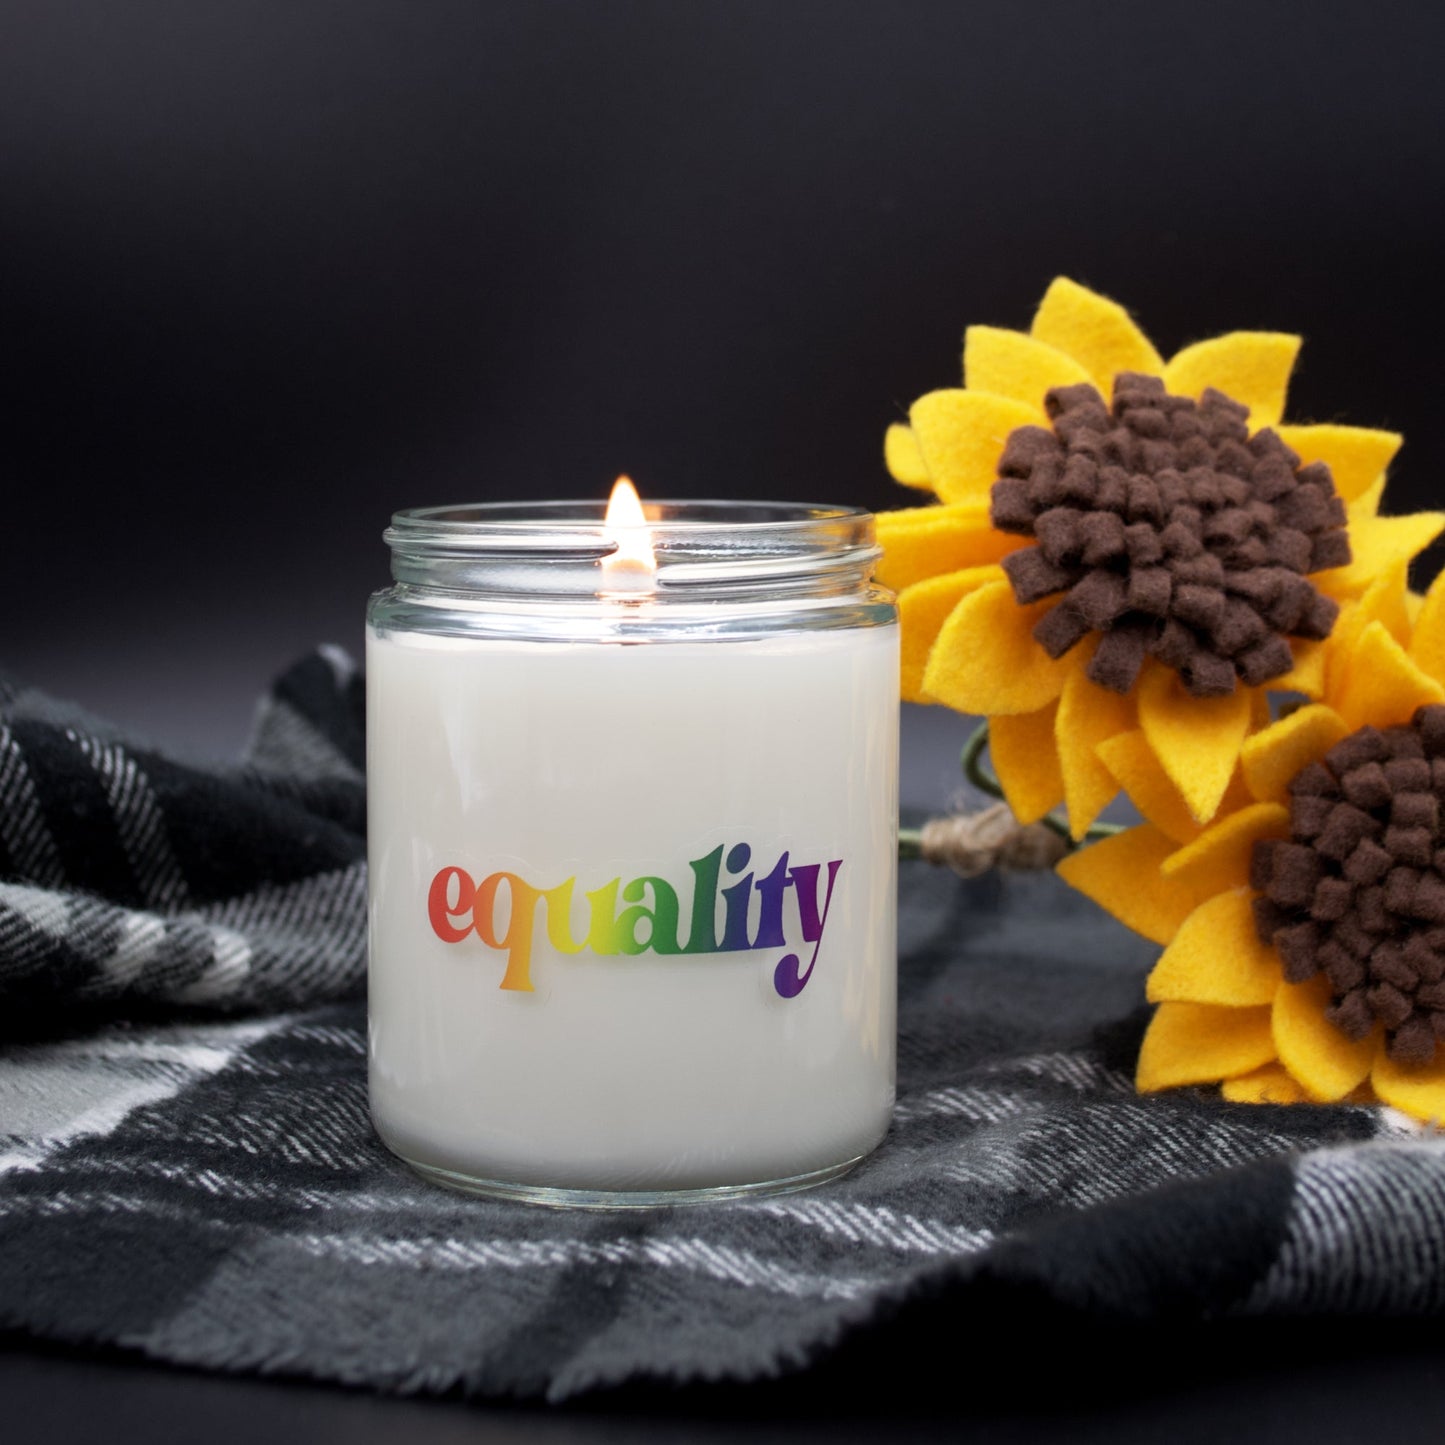 Equality - Scented Candle